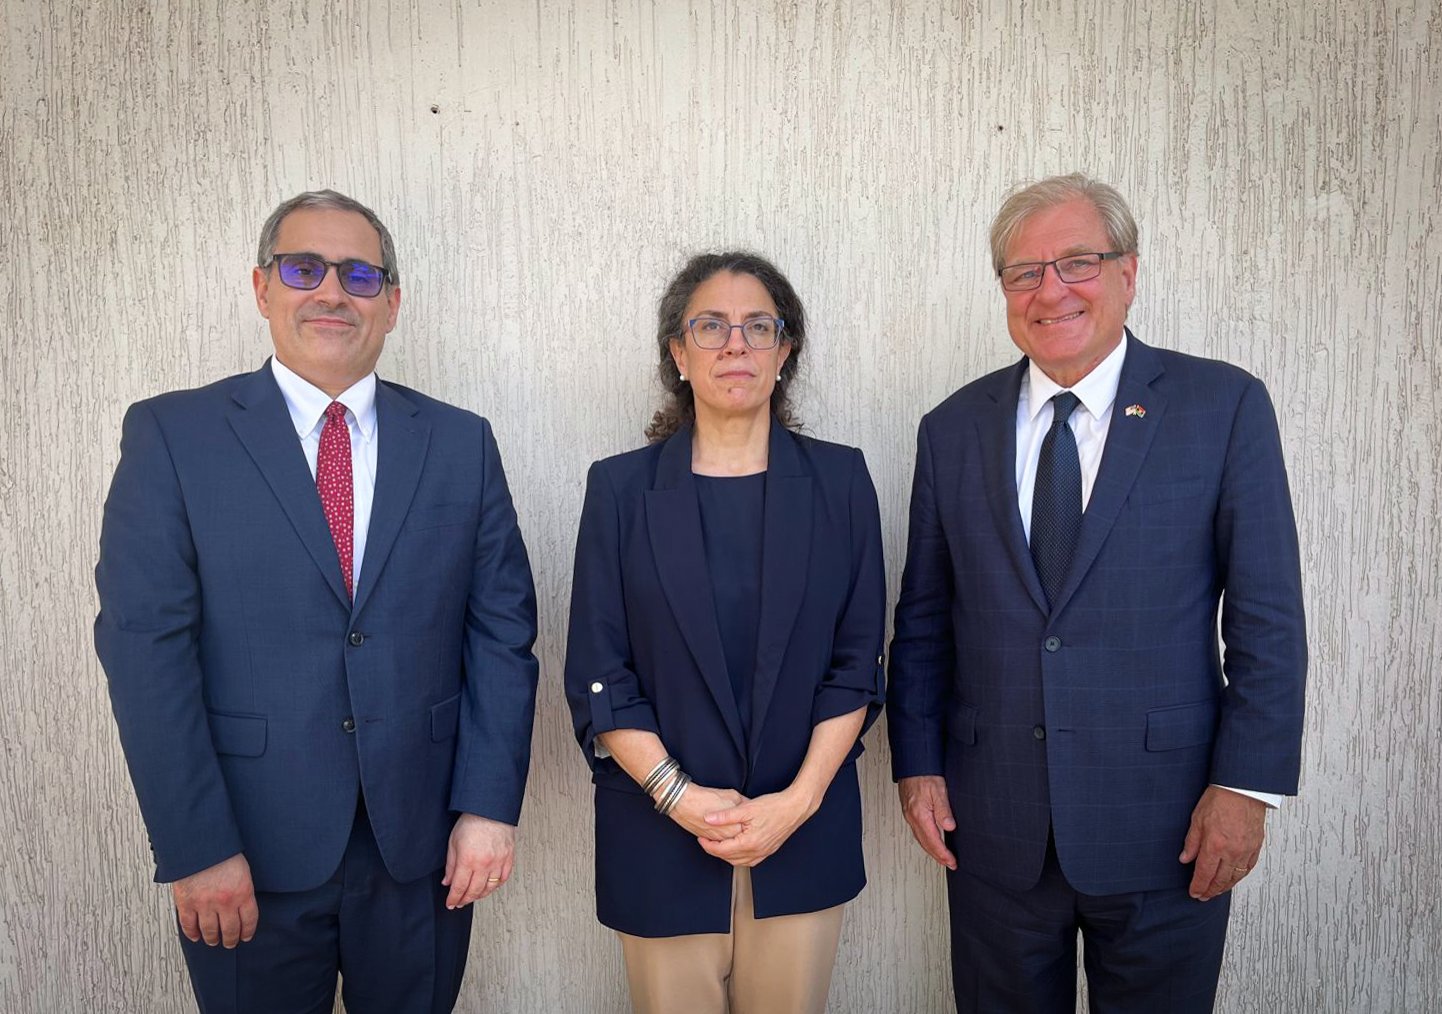 The US Special Envoy to Libya and the Chargé d'Affairs discuss with Stephanie Khoury efforts to facilitate a comprehensive political process in Libya.